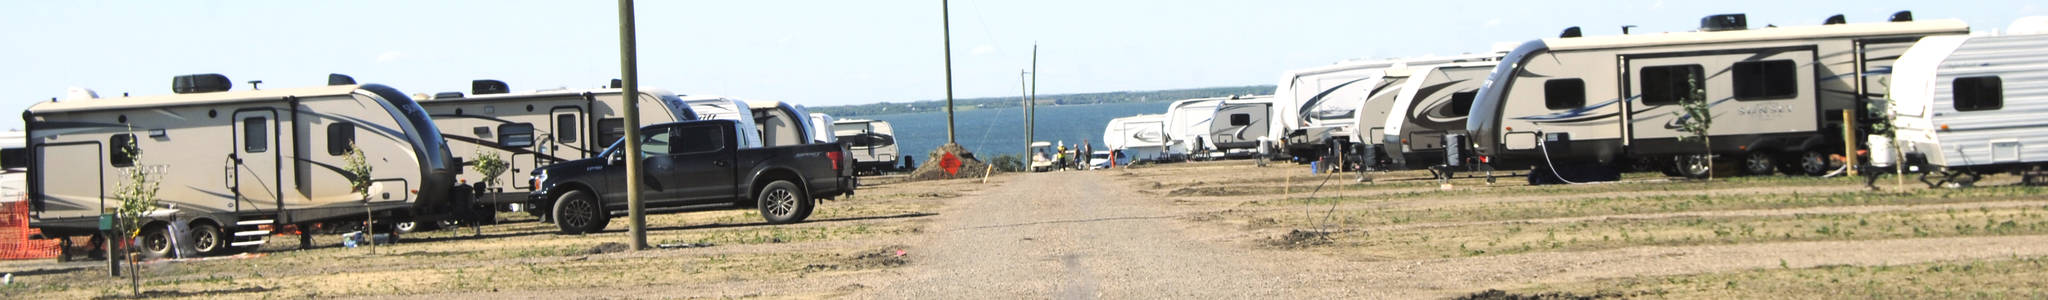 About 60 RV’s parked in a temporary site during development of Paradise Shores on July 5. (Lisa Joy/Black Press News Service)